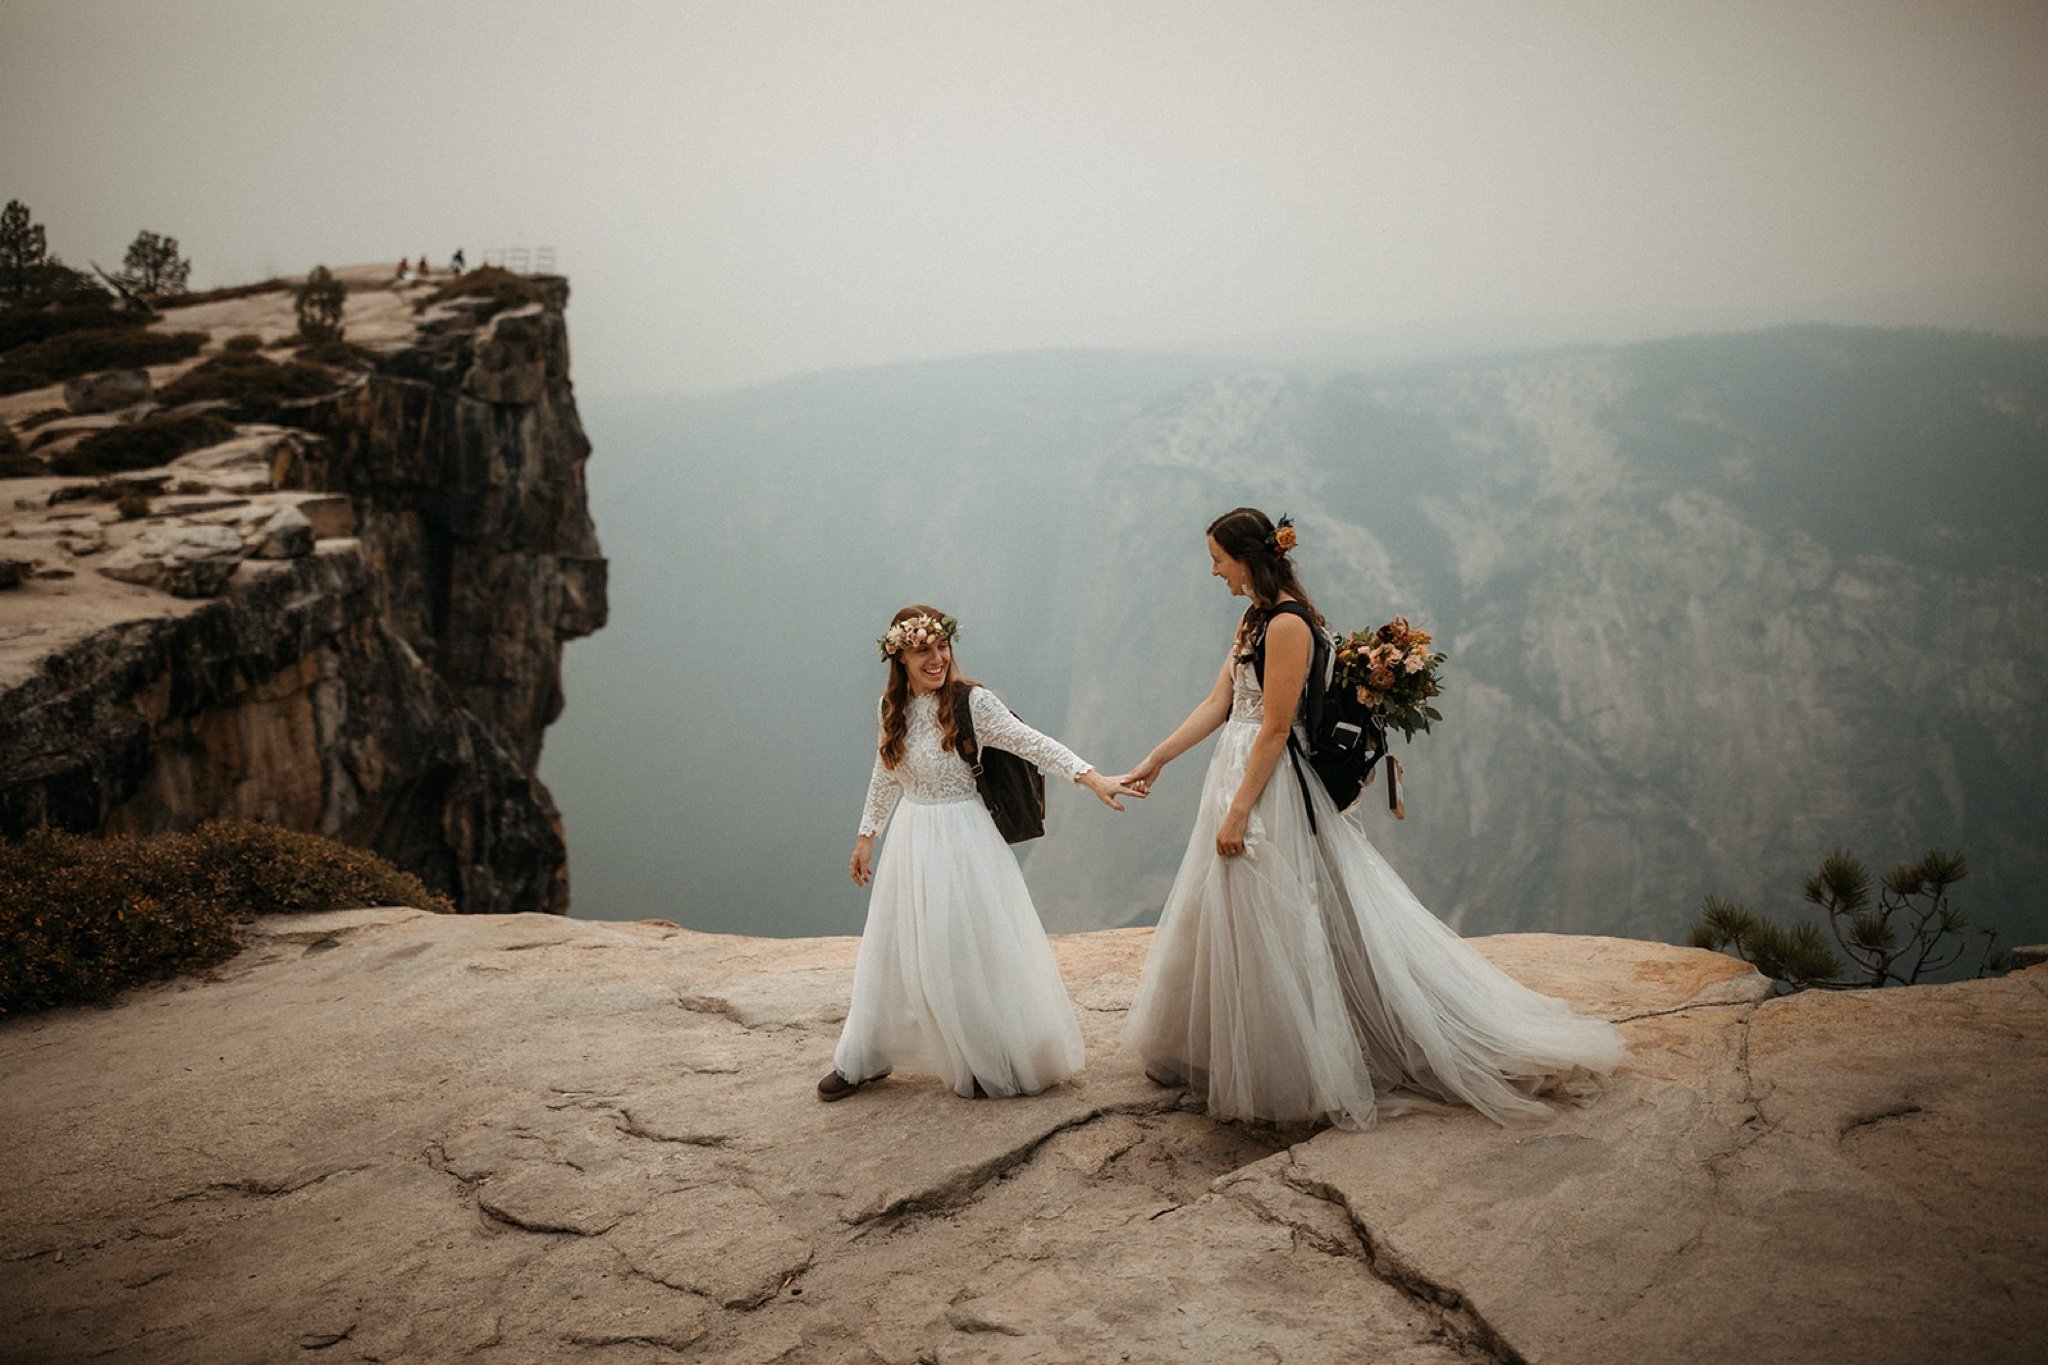 Yosemite National Park Elopement with Two Brides-Will Khoury33.jpg